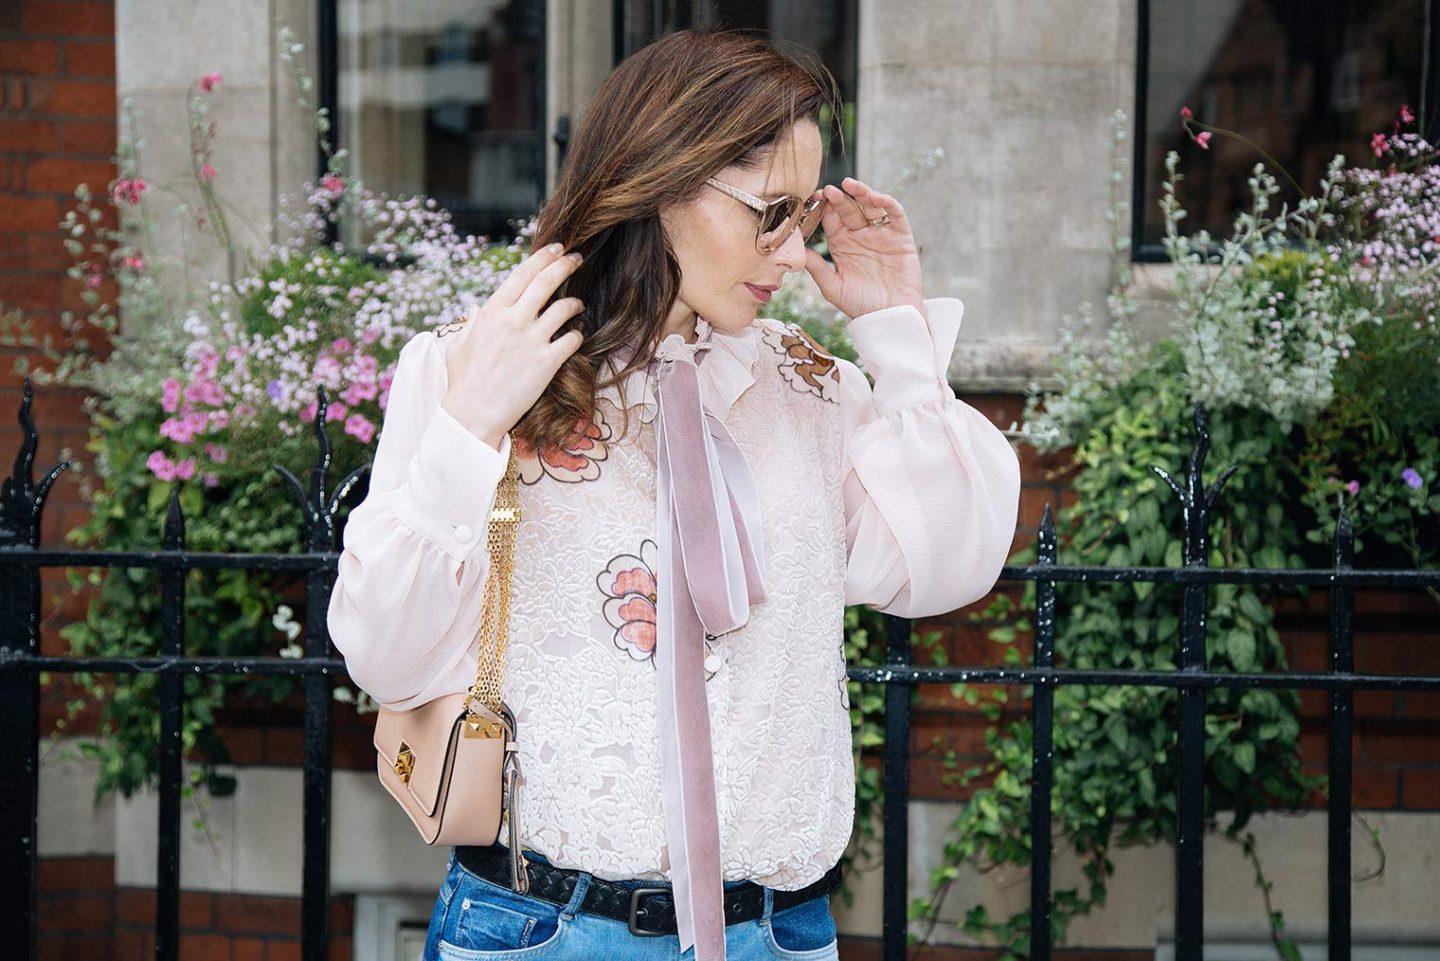 Boho chic style with See By Chloe blouse